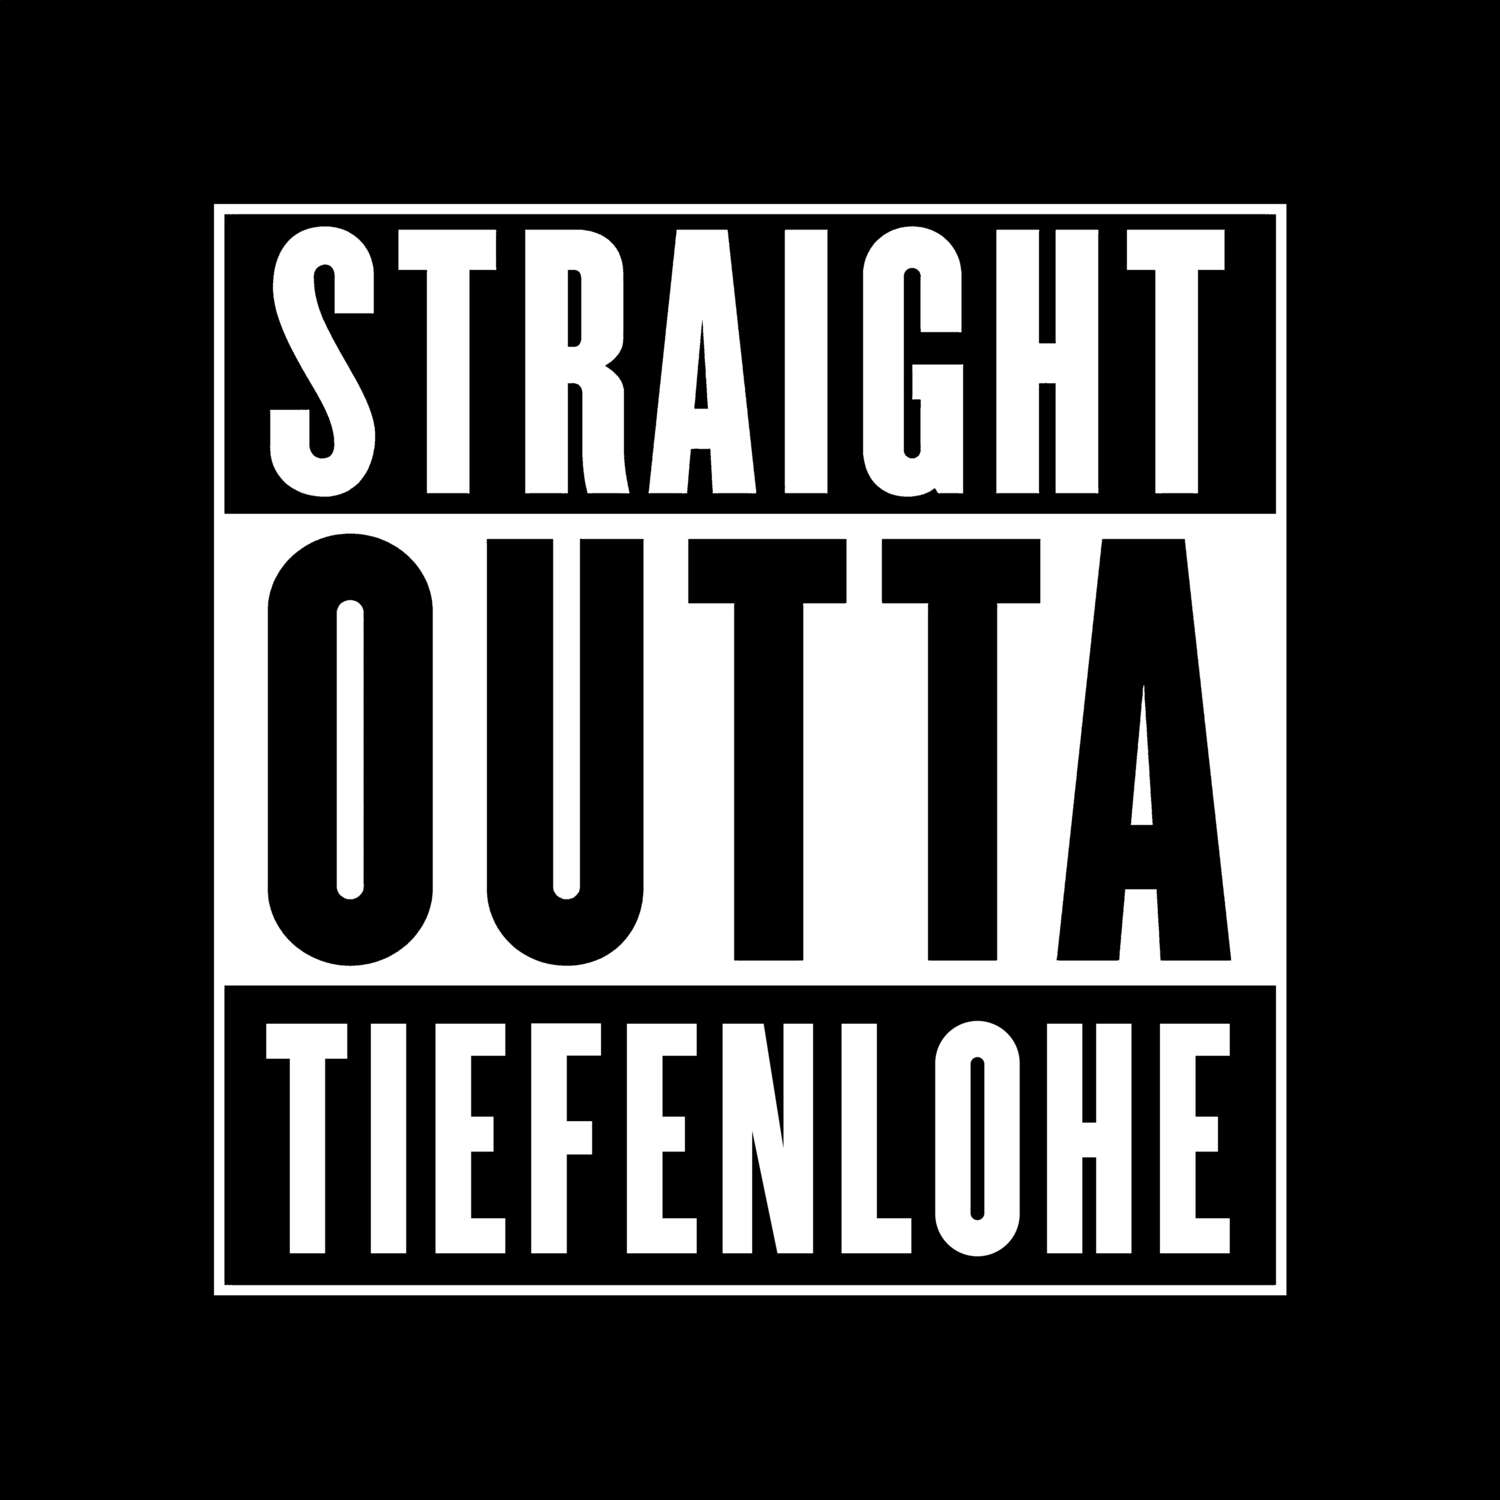 Tiefenlohe T-Shirt »Straight Outta«